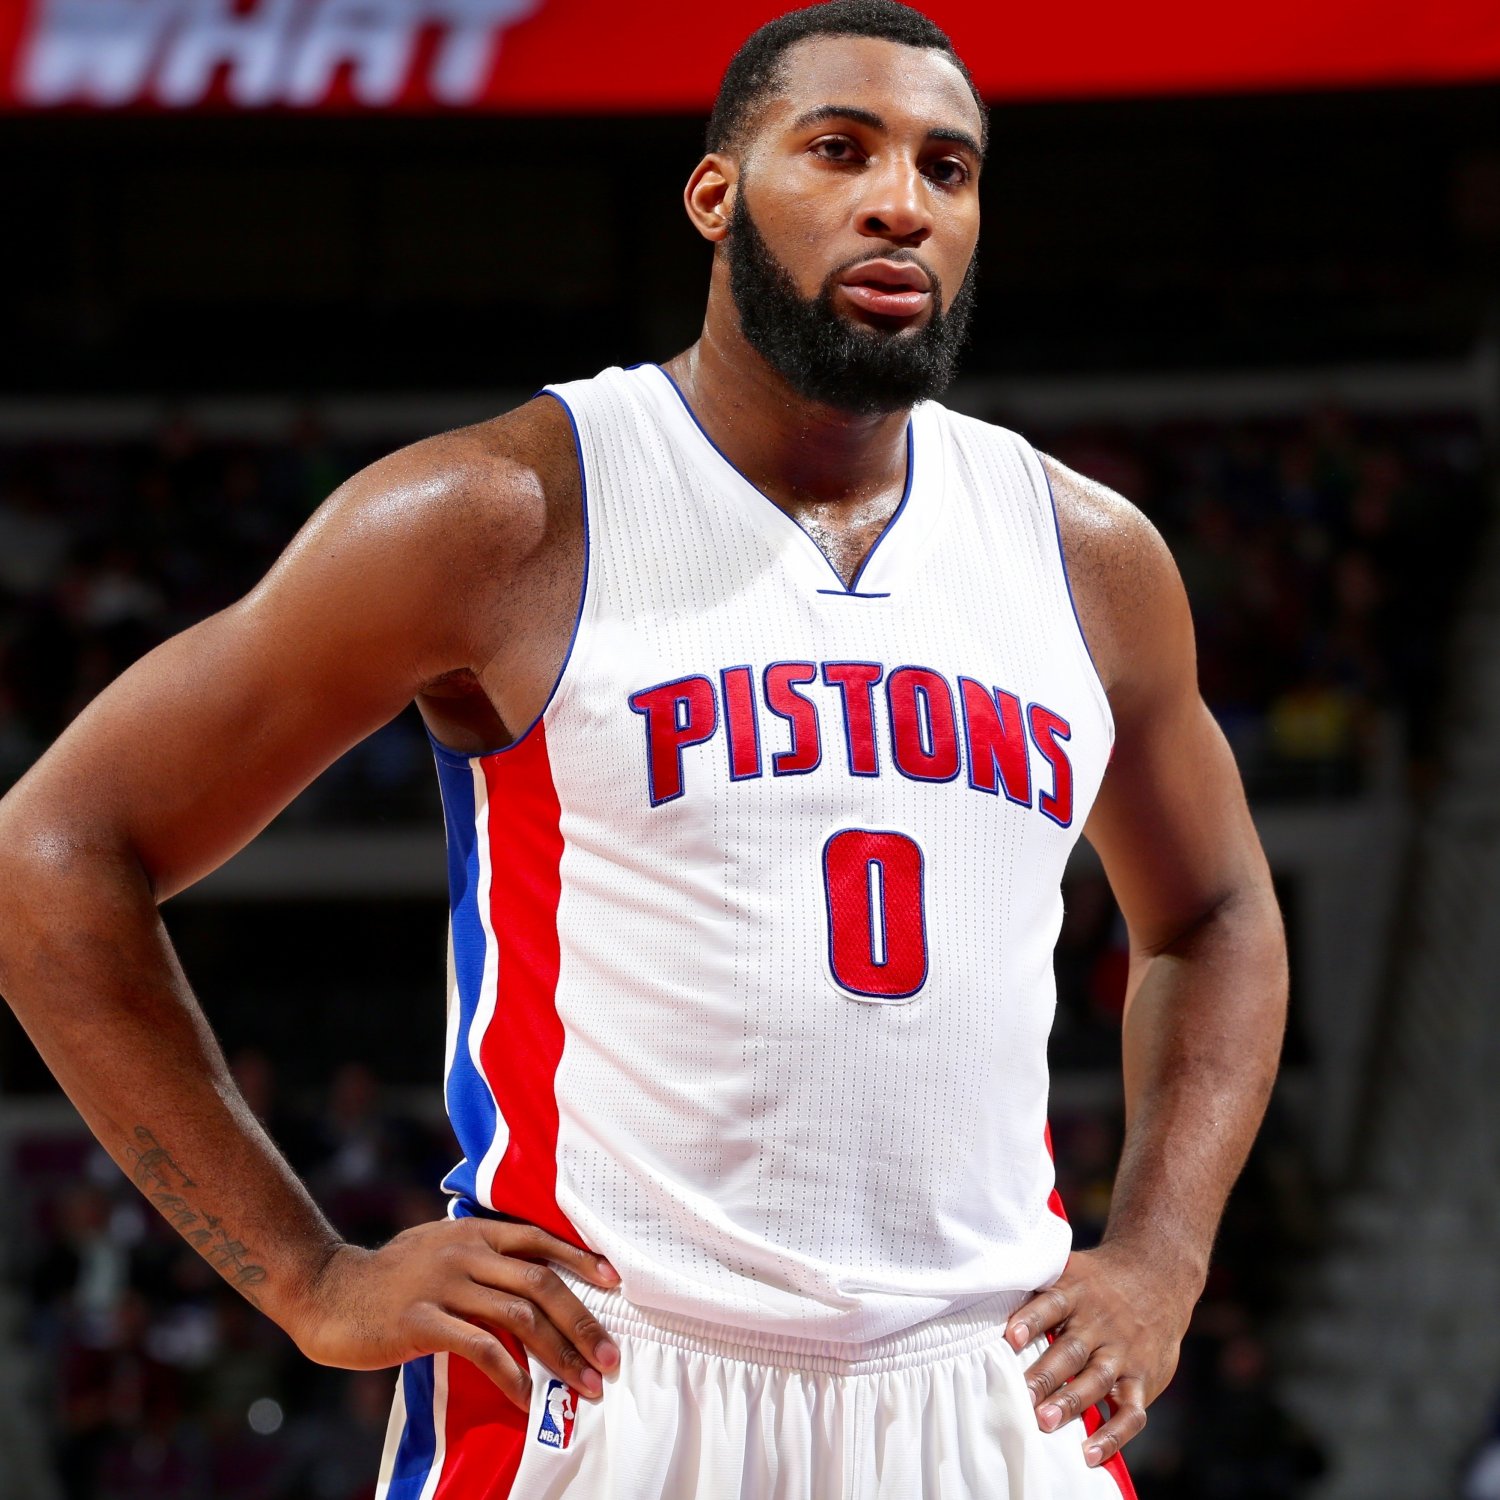 Andre Drummond Facing Important Offseason, Crucial 4th Year in NBA | Bleacher Report